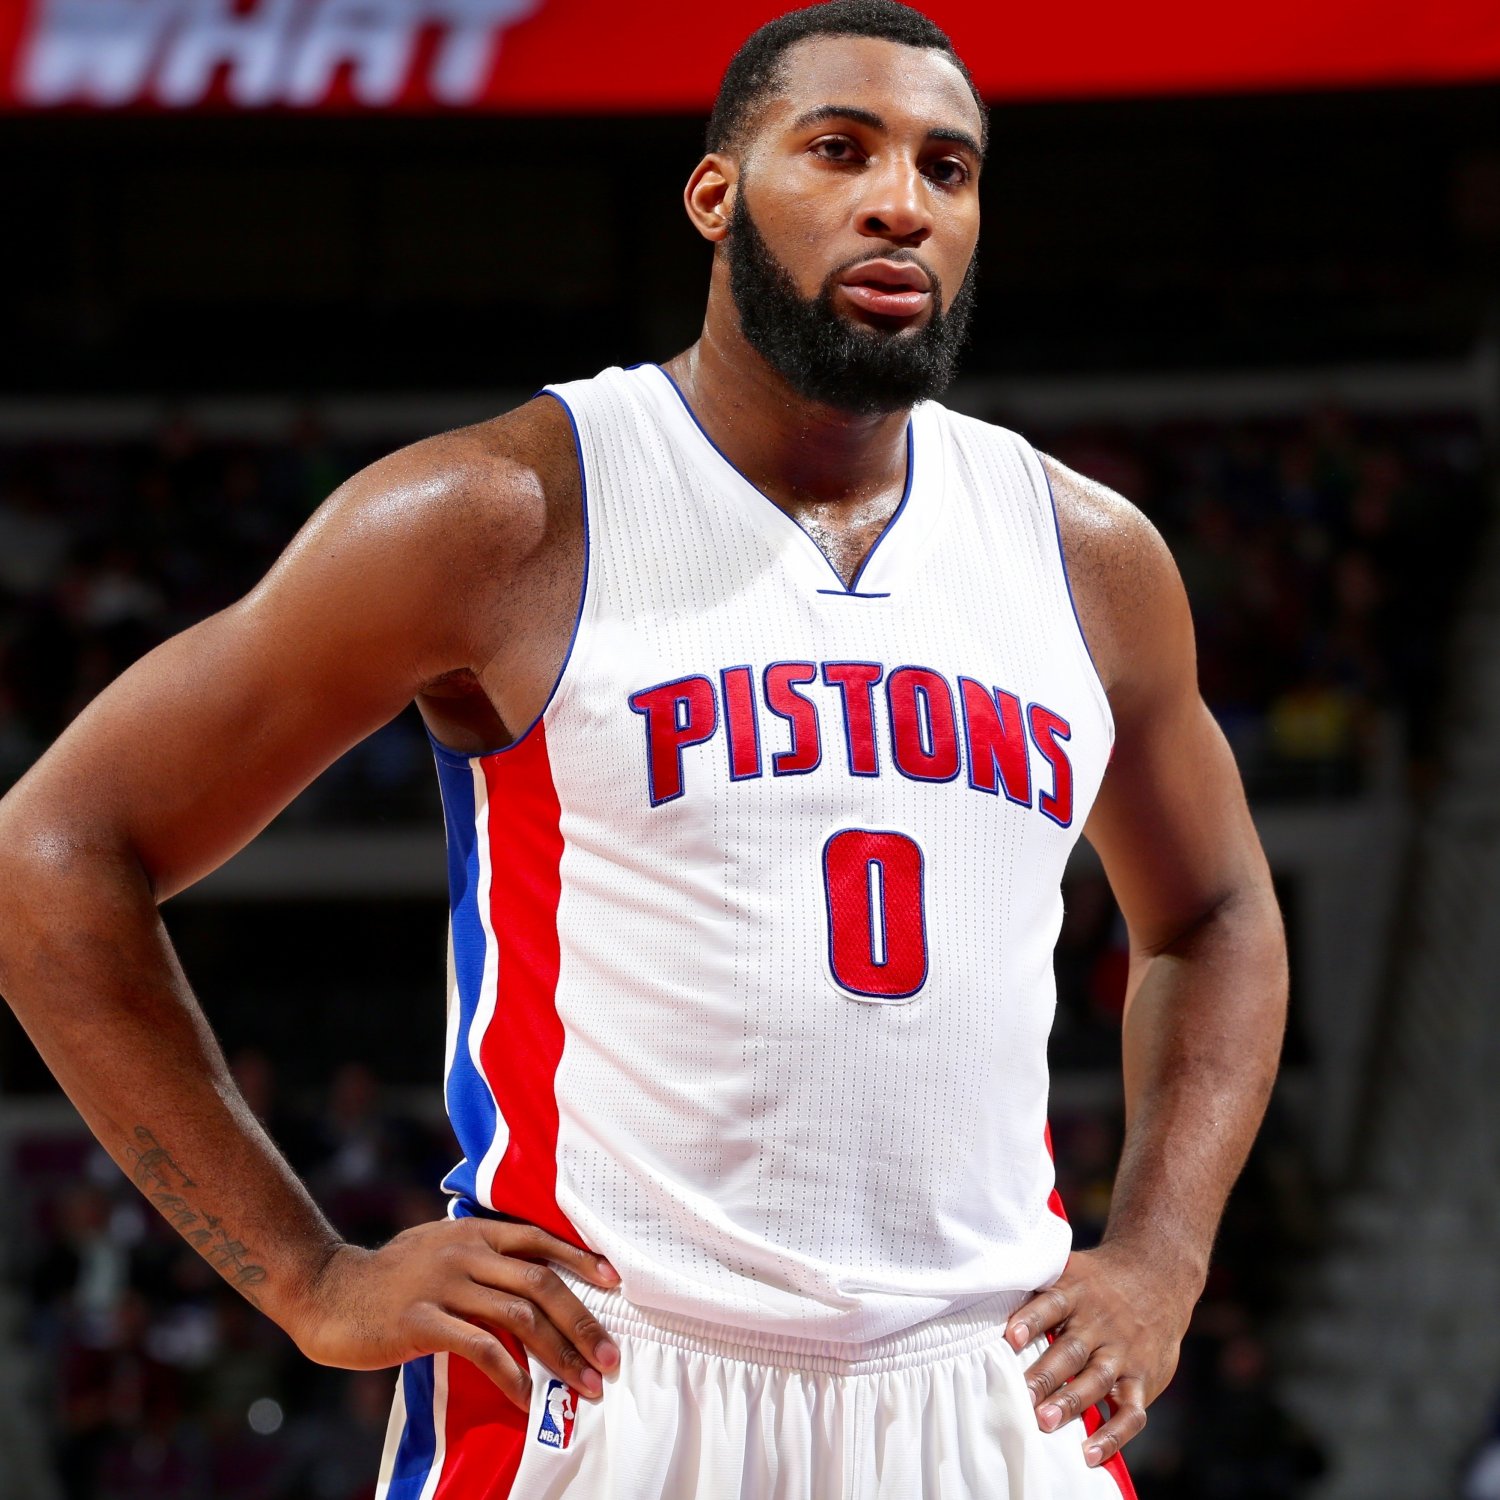 Andre Drummond Facing Important Offseason, Crucial 4th Year in NBA | Bleacher Report